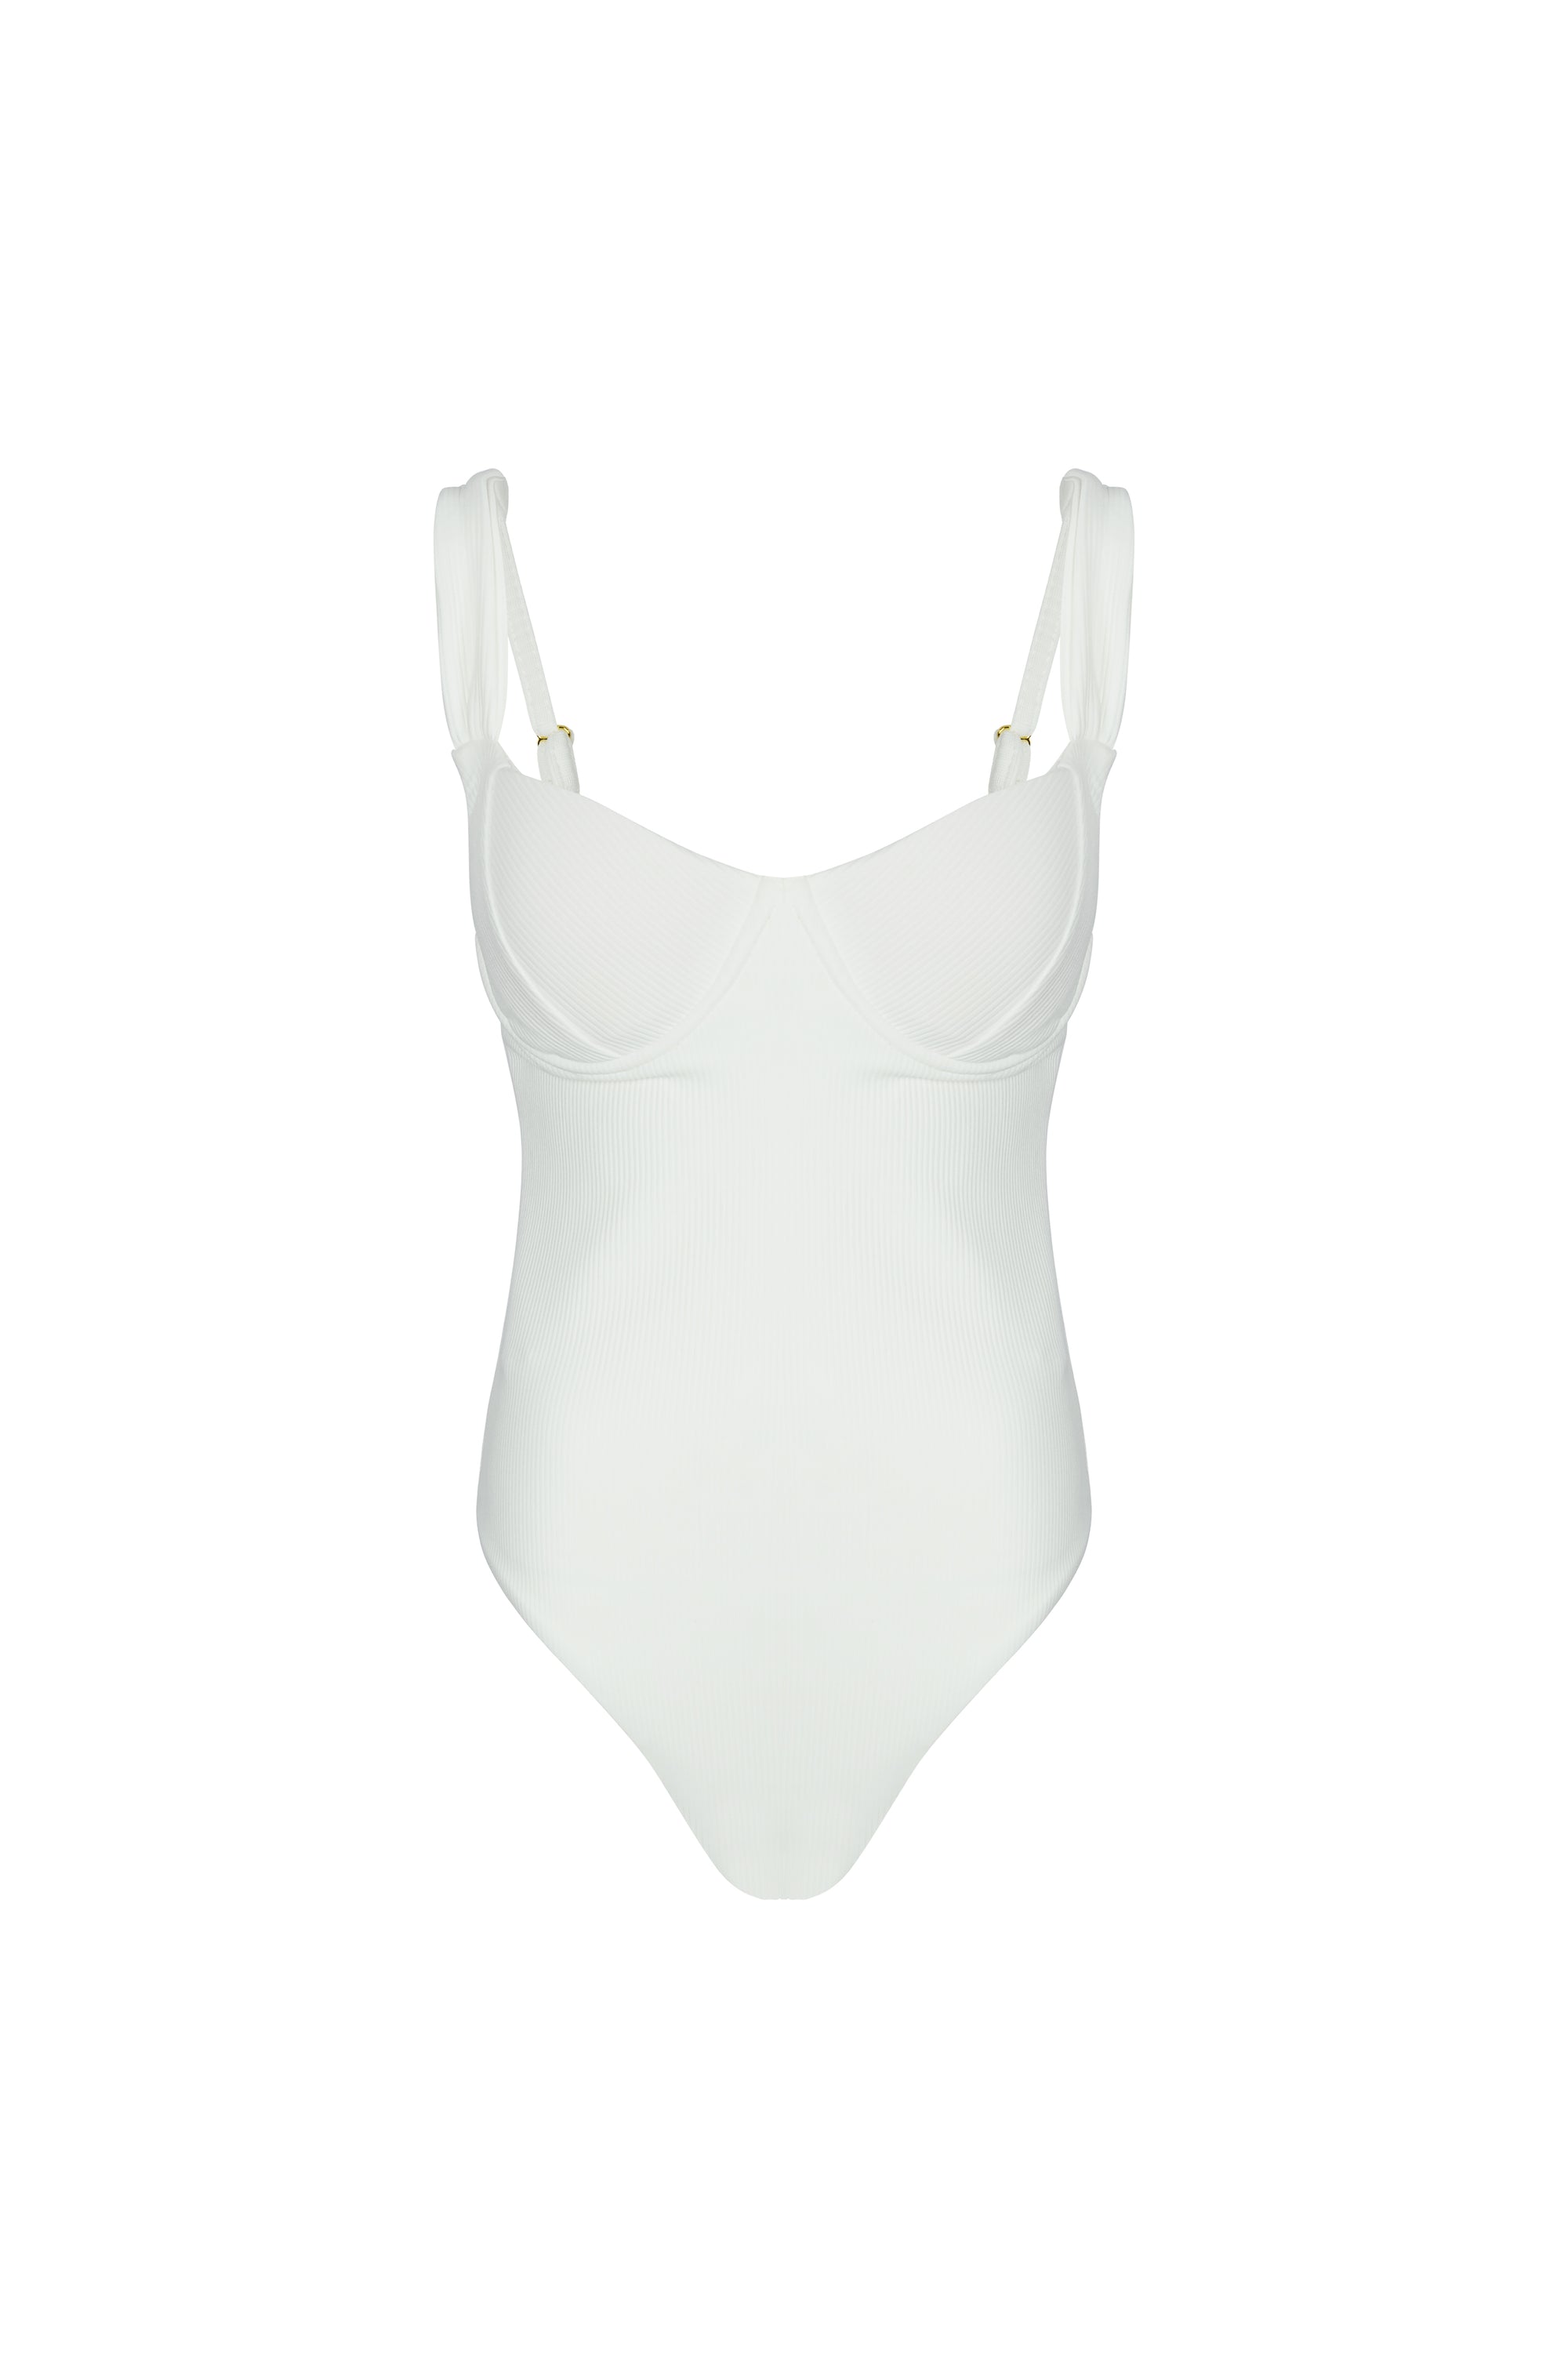 Front view of White bathing suit on plain background